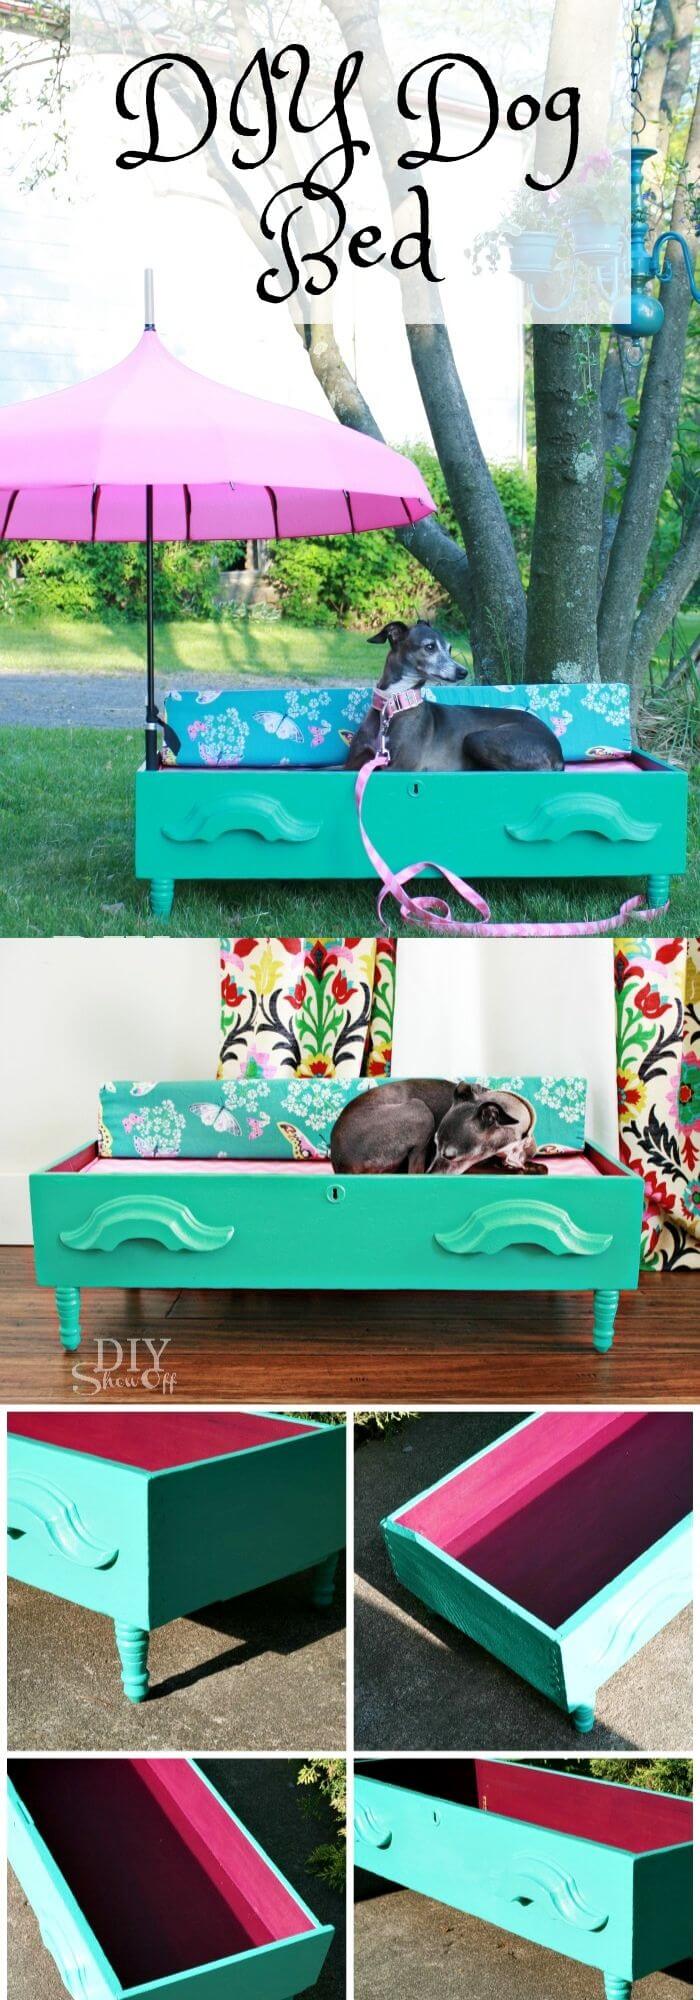 4 recycled old drawer ideas